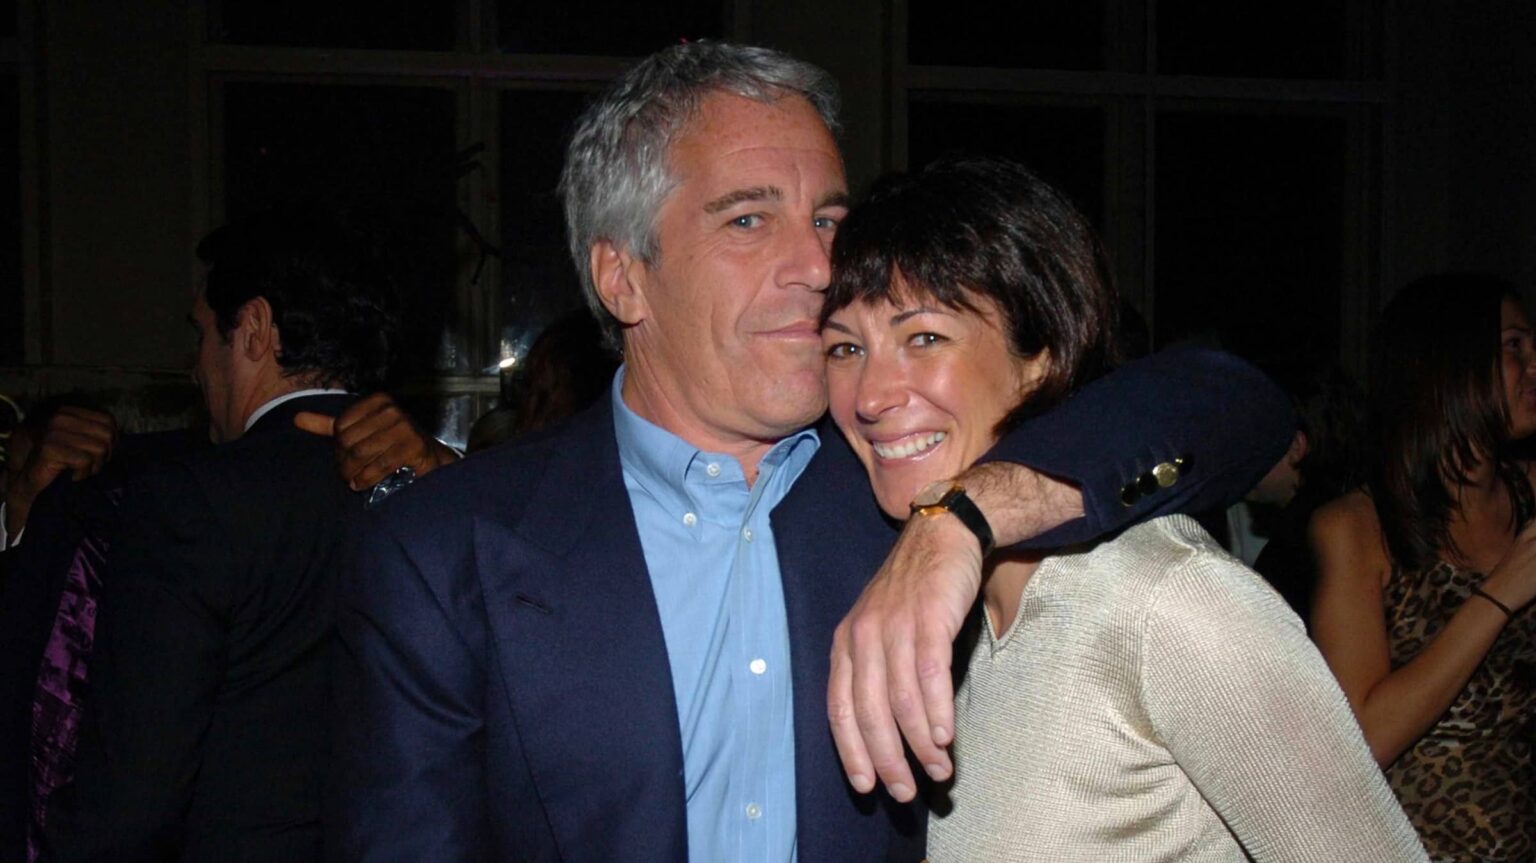 The nightmarish revelations never end. Brace yourself for more damning testimonies from the victims of Jeffrey Epstein and Ghislaine Maxwell.